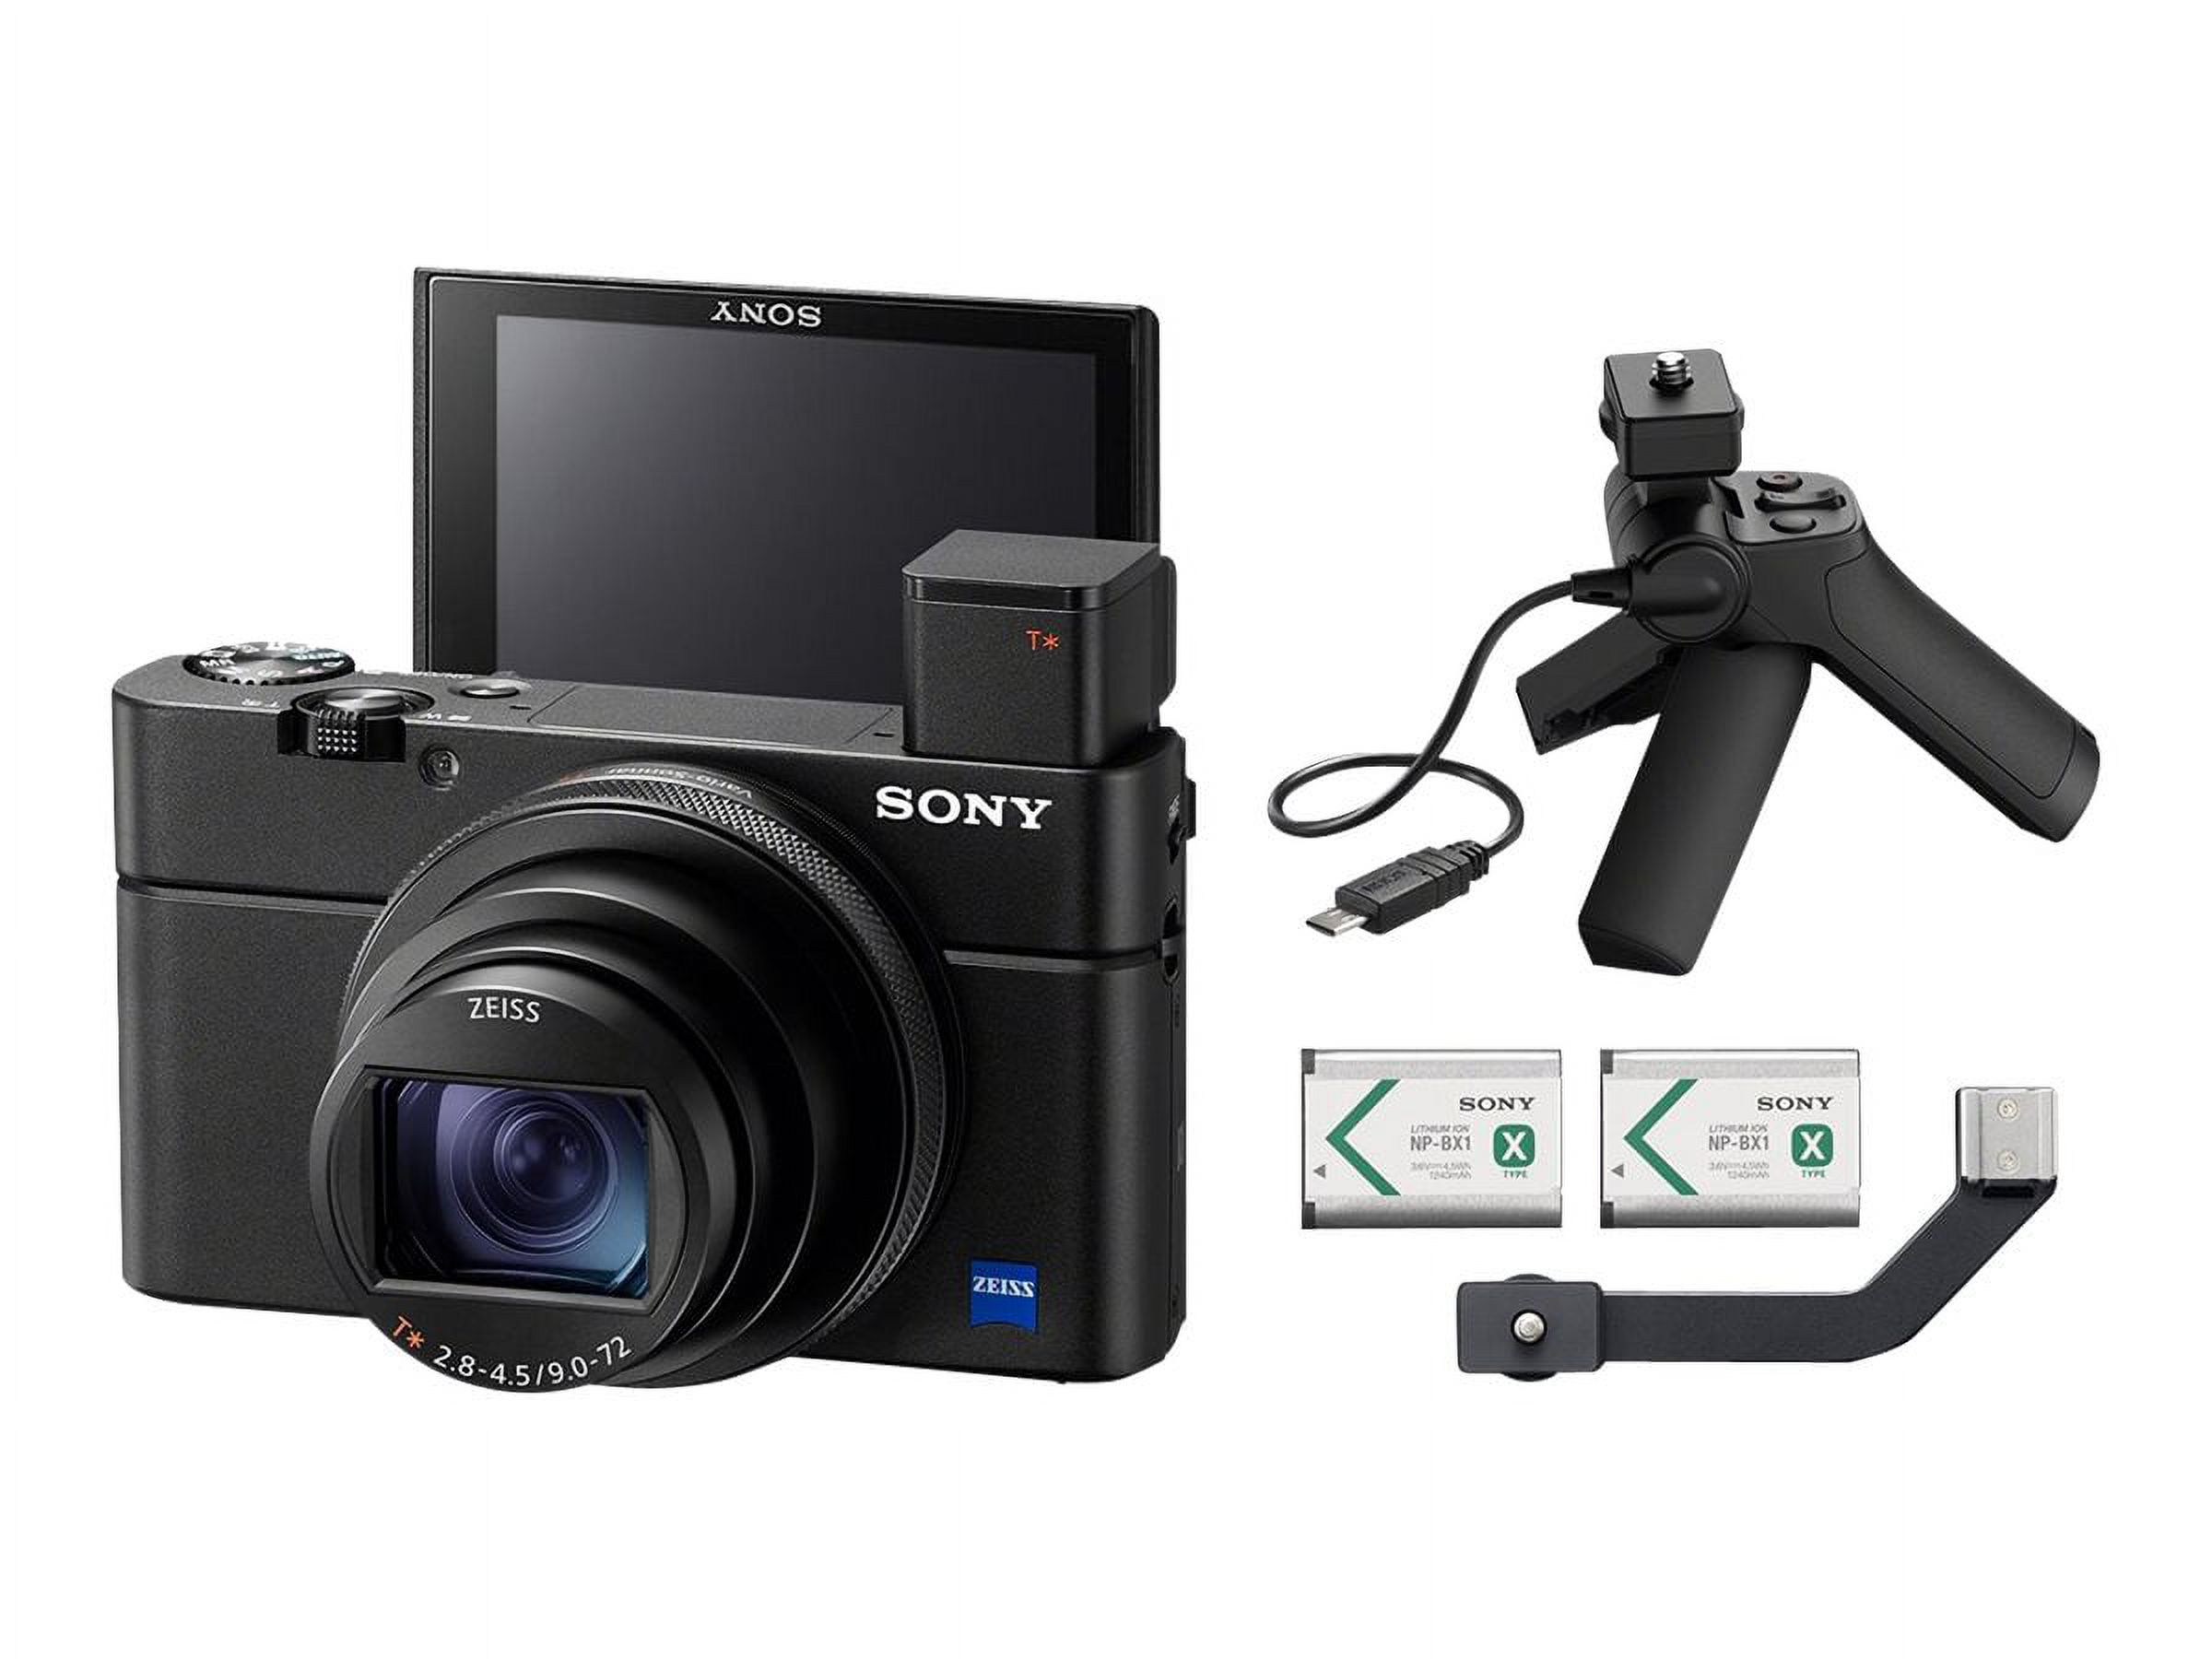 Sony Cyber-shot DSC-RX100 VII - Digital camera - compact - 20.1 MP - 4K / 30 fps - 8x optical zoom - ZEISS - Wi-Fi, NFC, Bluetooth - black - with Sony VCT-SGR1 Shooting Grip - image 1 of 15